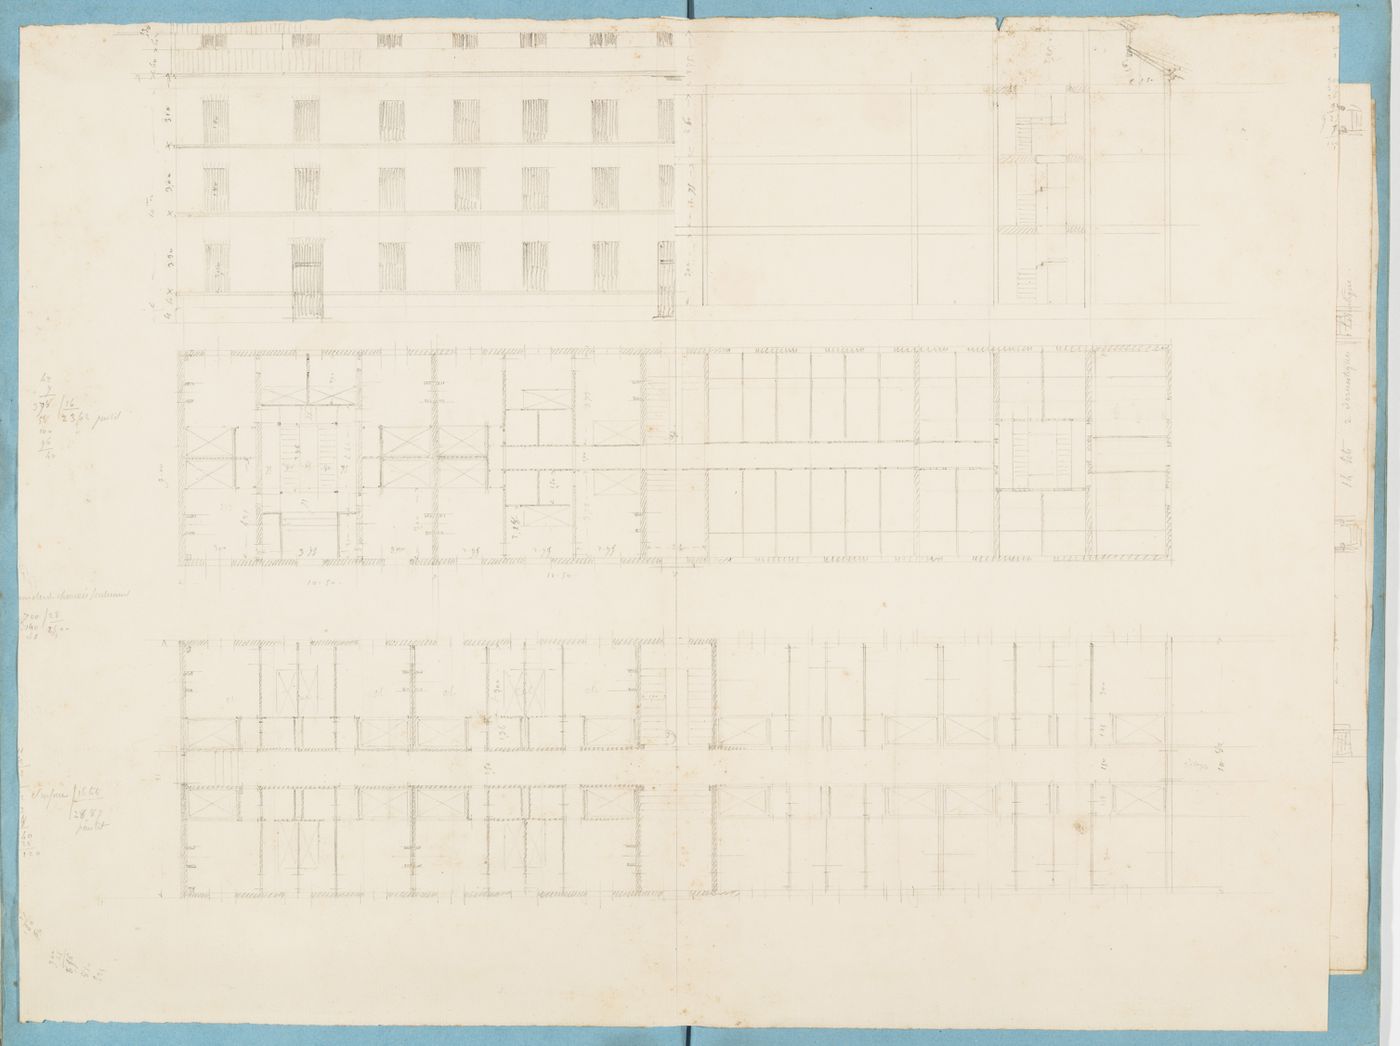 Project for housing for M. Busche: Plans, partial elevation and section for a three-storey apartment house